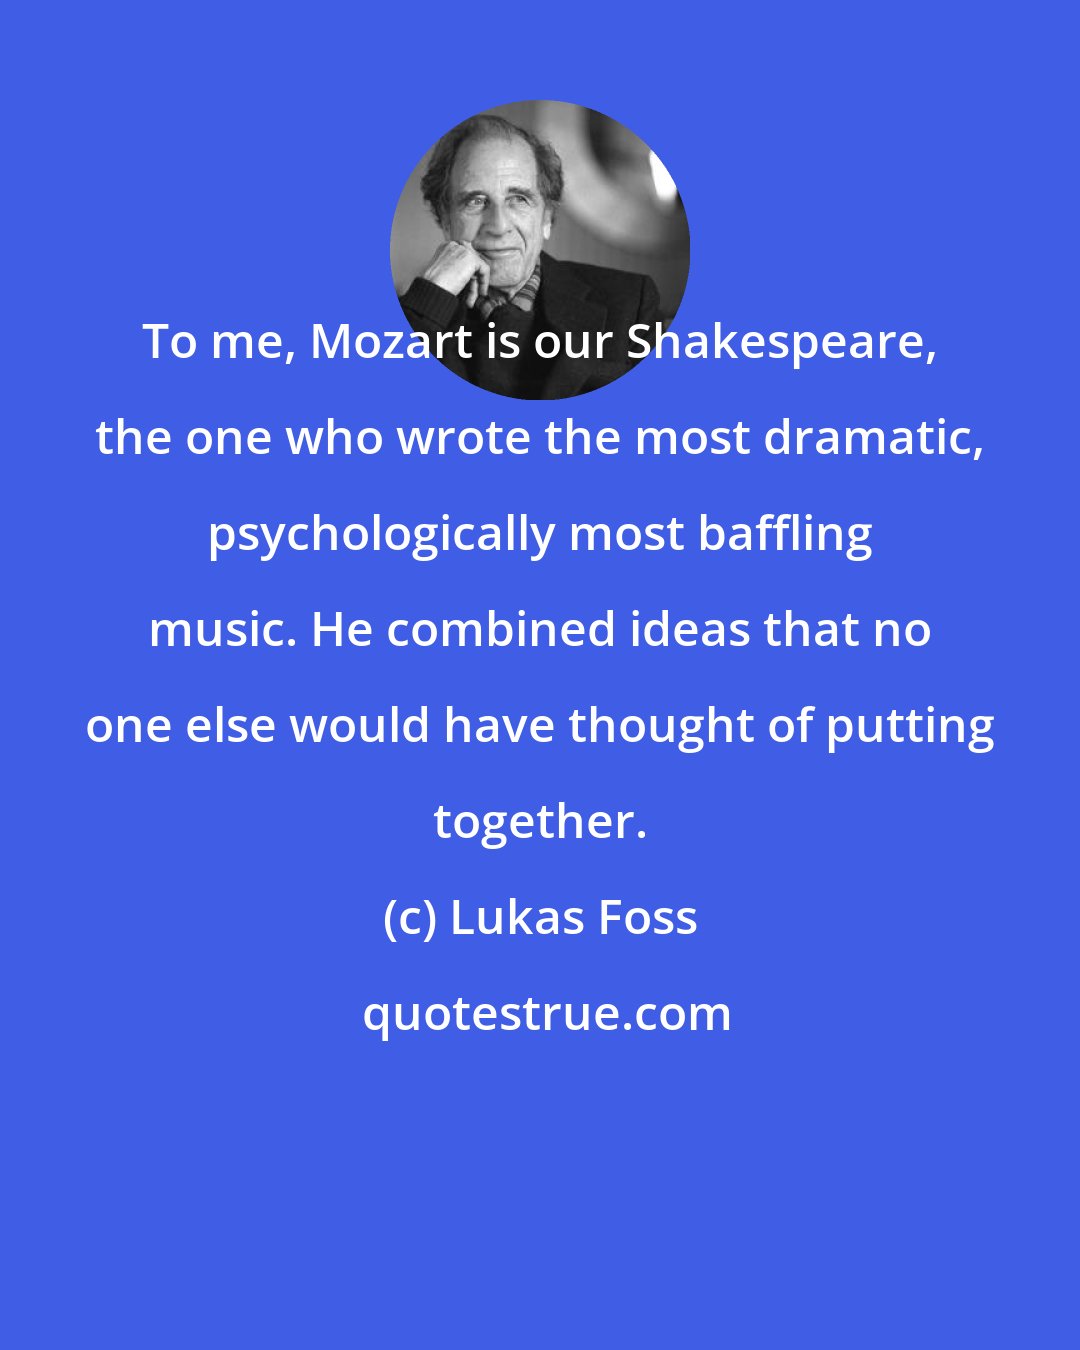 Lukas Foss: To me, Mozart is our Shakespeare, the one who wrote the most dramatic, psychologically most baffling music. He combined ideas that no one else would have thought of putting together.